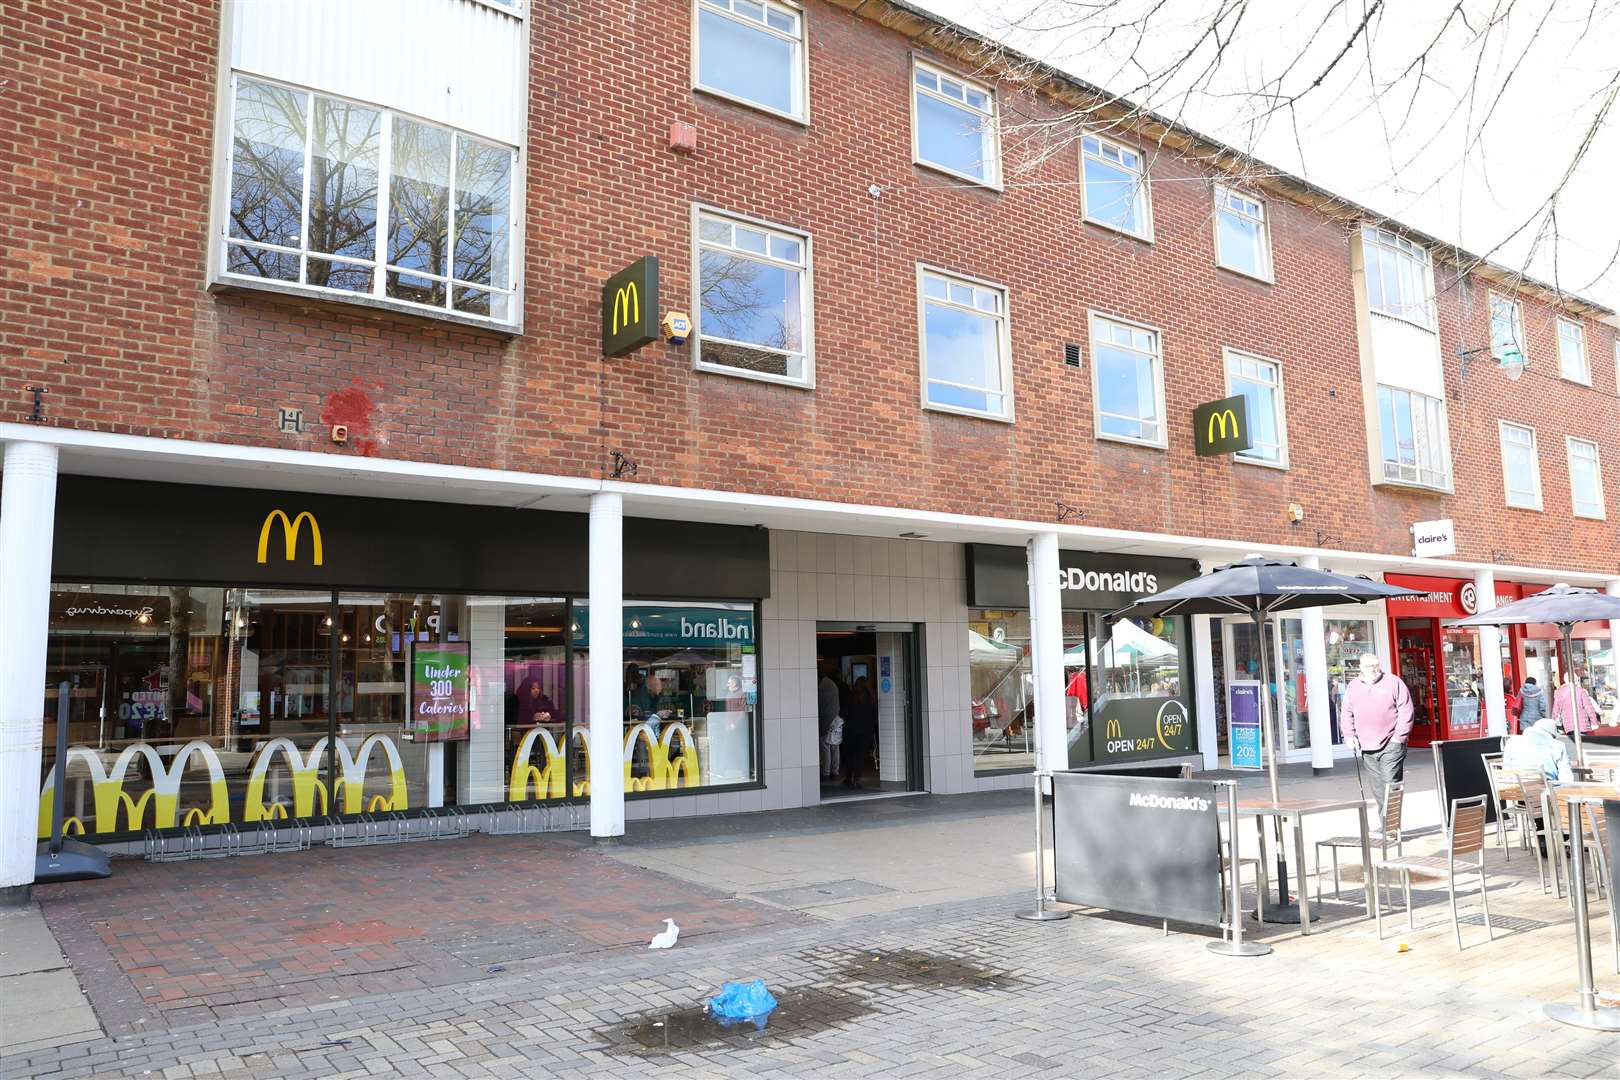 Holman tried to steal a bike outside McDonald's in Canterbury